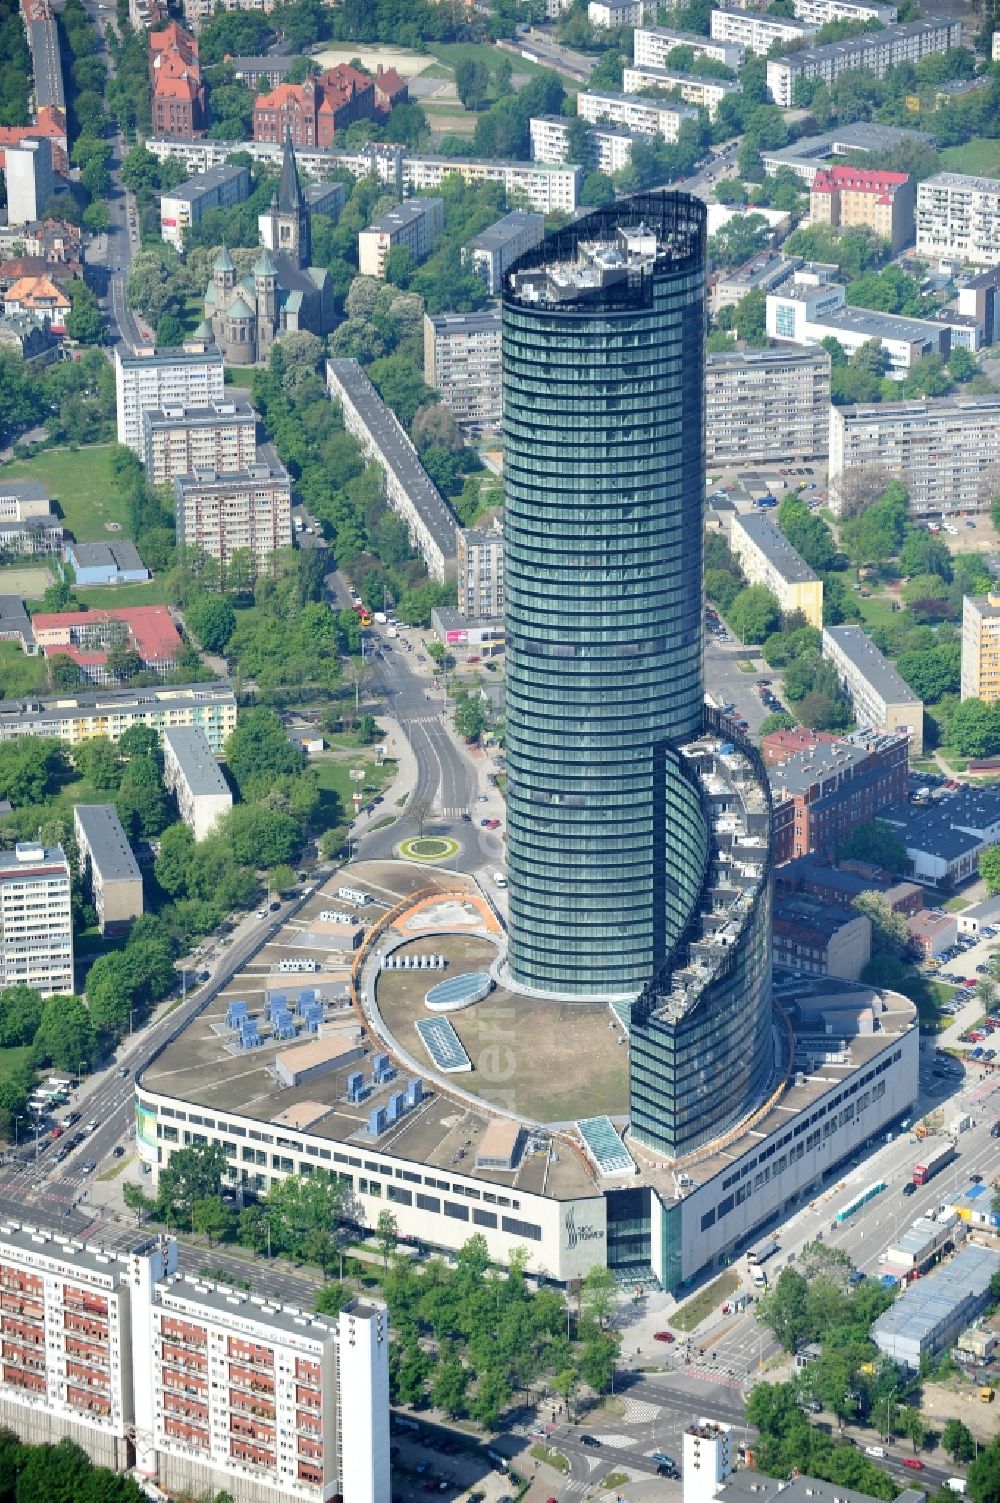 Wroclaw / Breslau from above - The newly constructed high-rise sky tower in Wroclaw / Breslau. The modern residential and commercial building is 260 meters, the tallest building in Poland. Architect is Dariusz Dziubi?ski Studio Archiektoniczne FOLD s.c